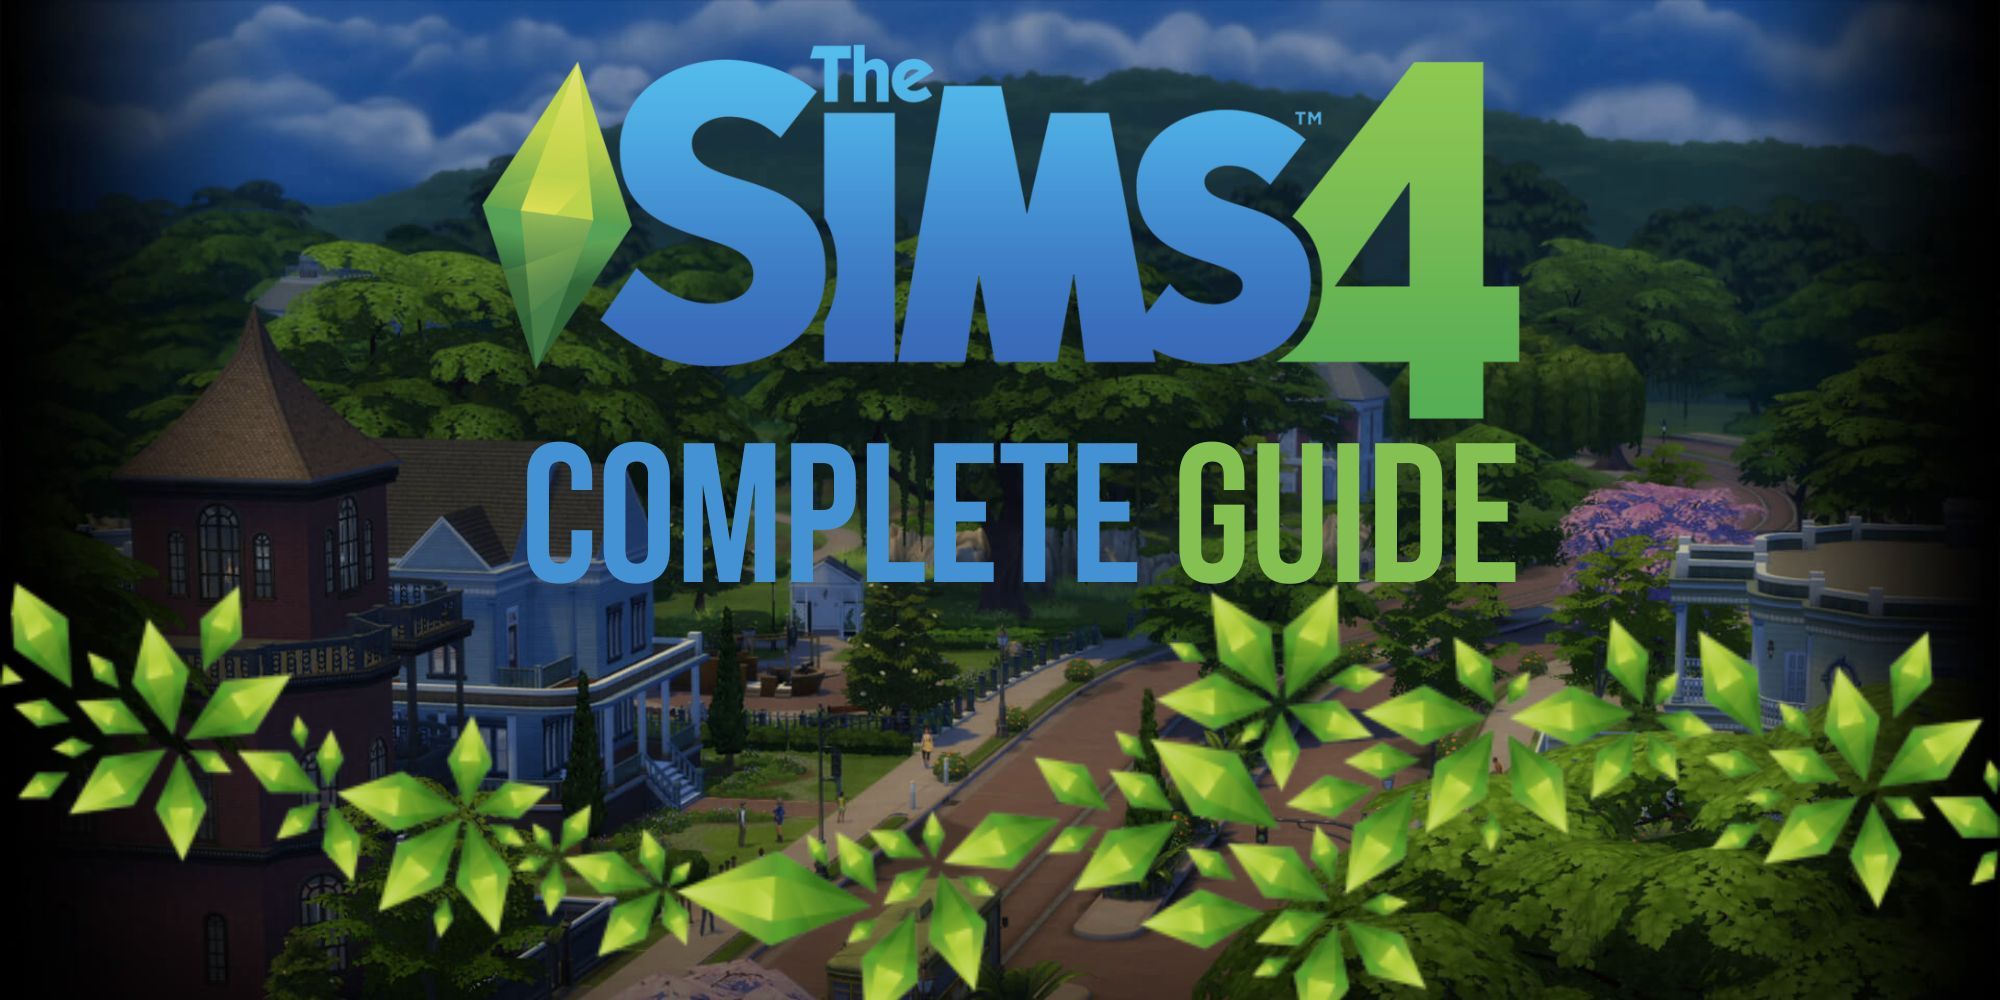 Full List of The Sims 4 Growing Together Items: CAS and Build